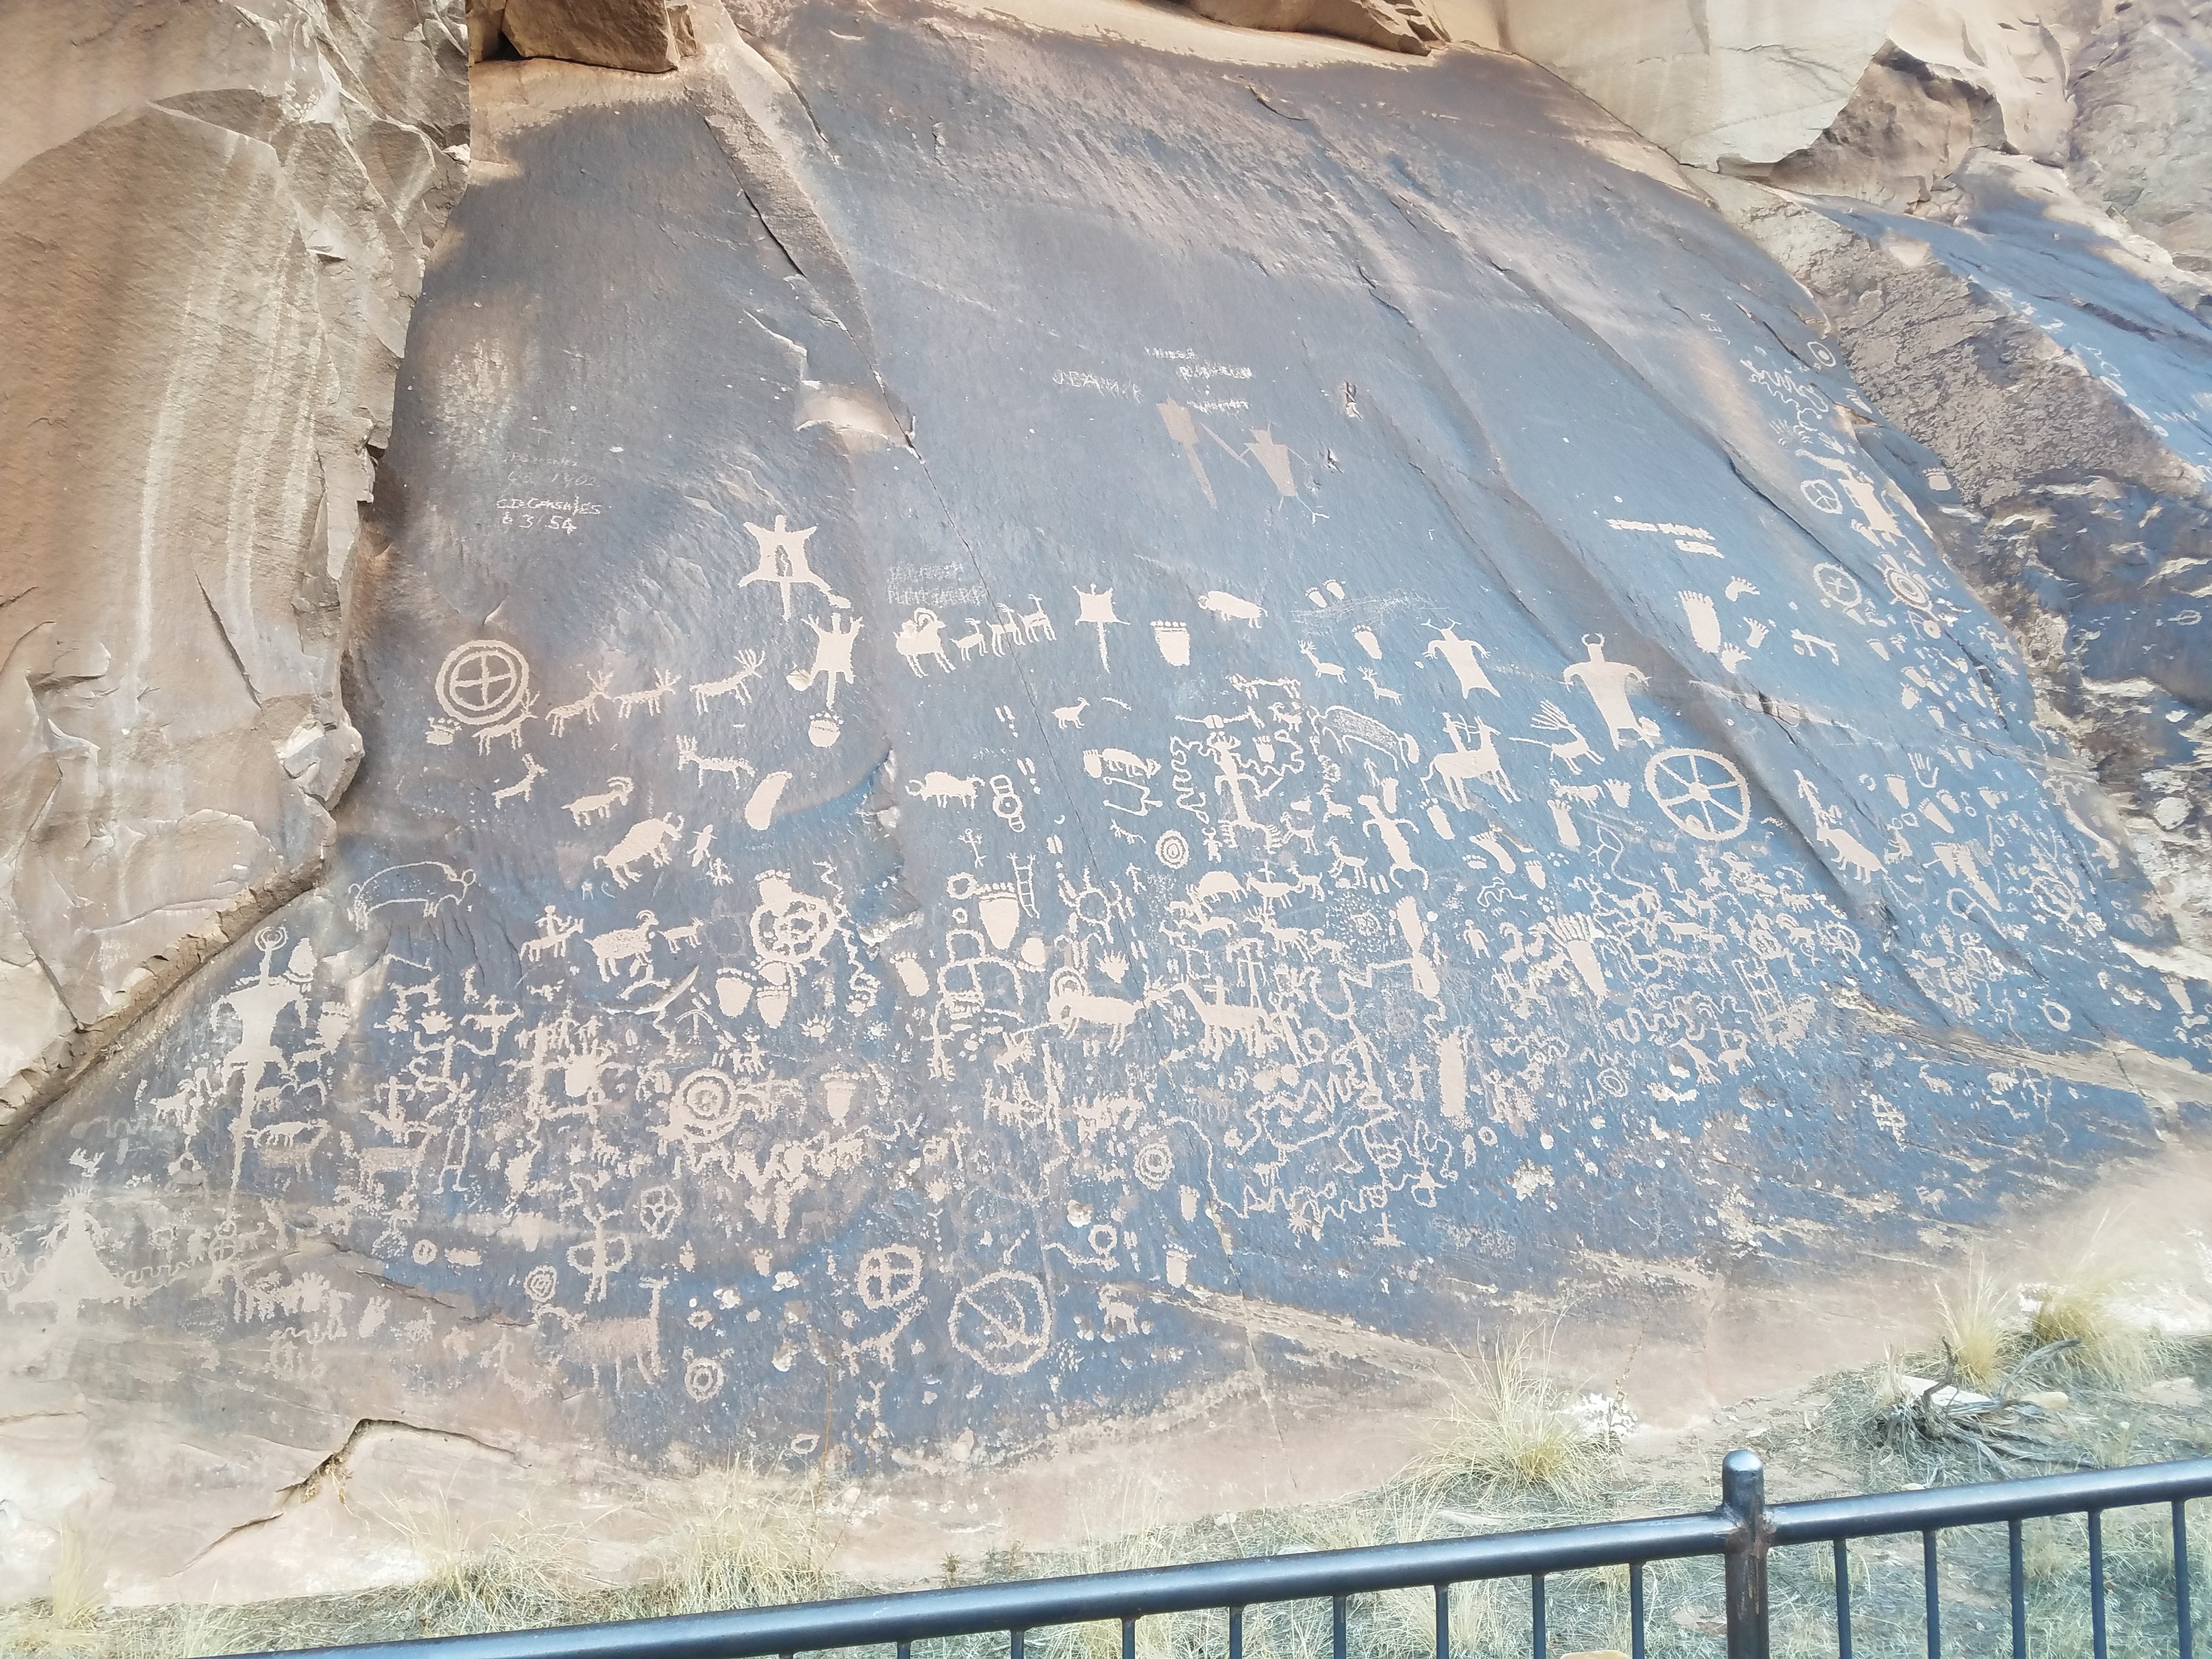 About 45 minute drive south of the campground is the famous newspaper rock.